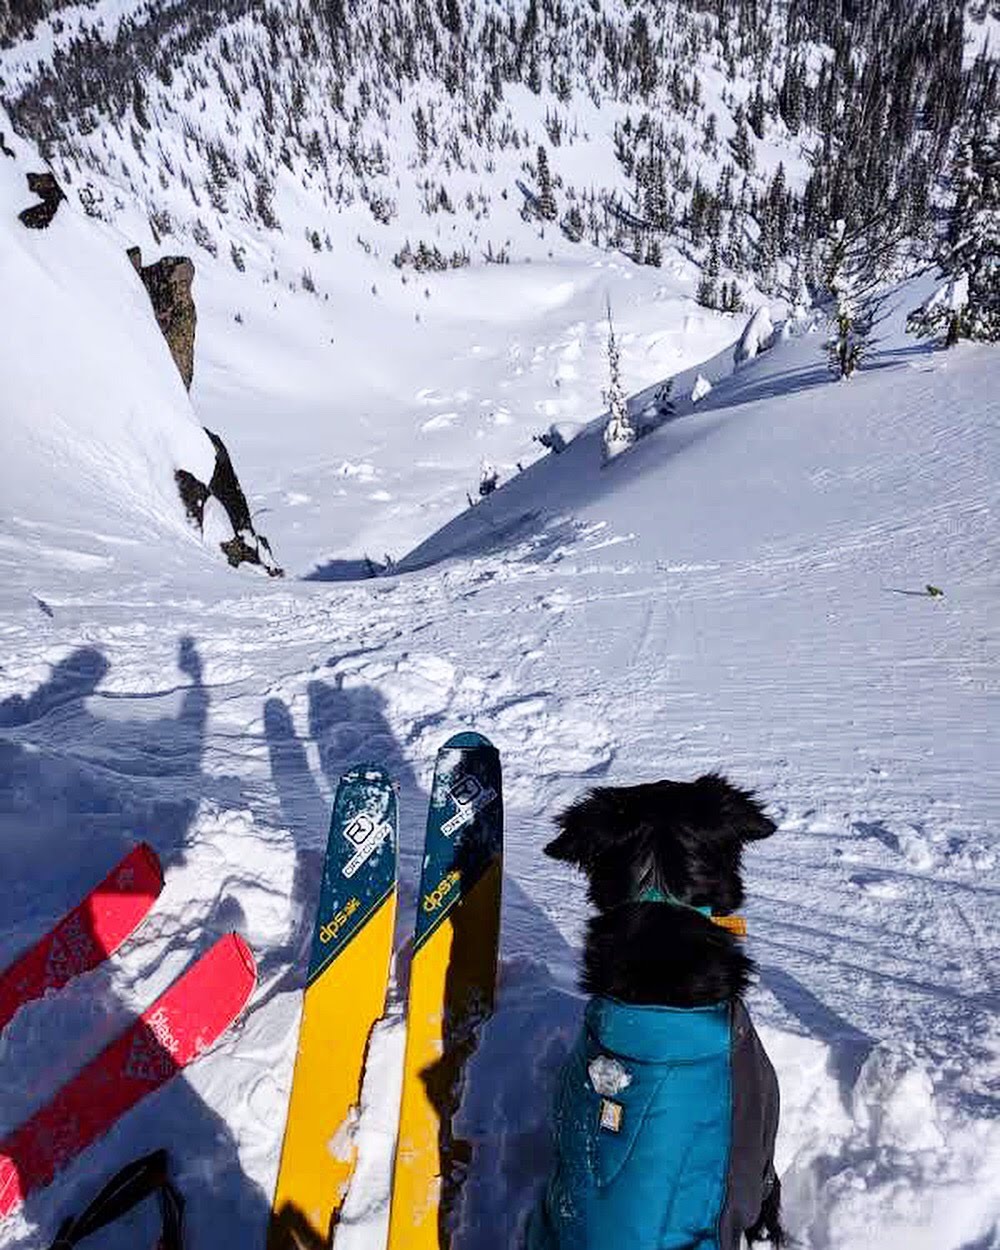 Alli and Riggins about to ski at the top of a steep chute.